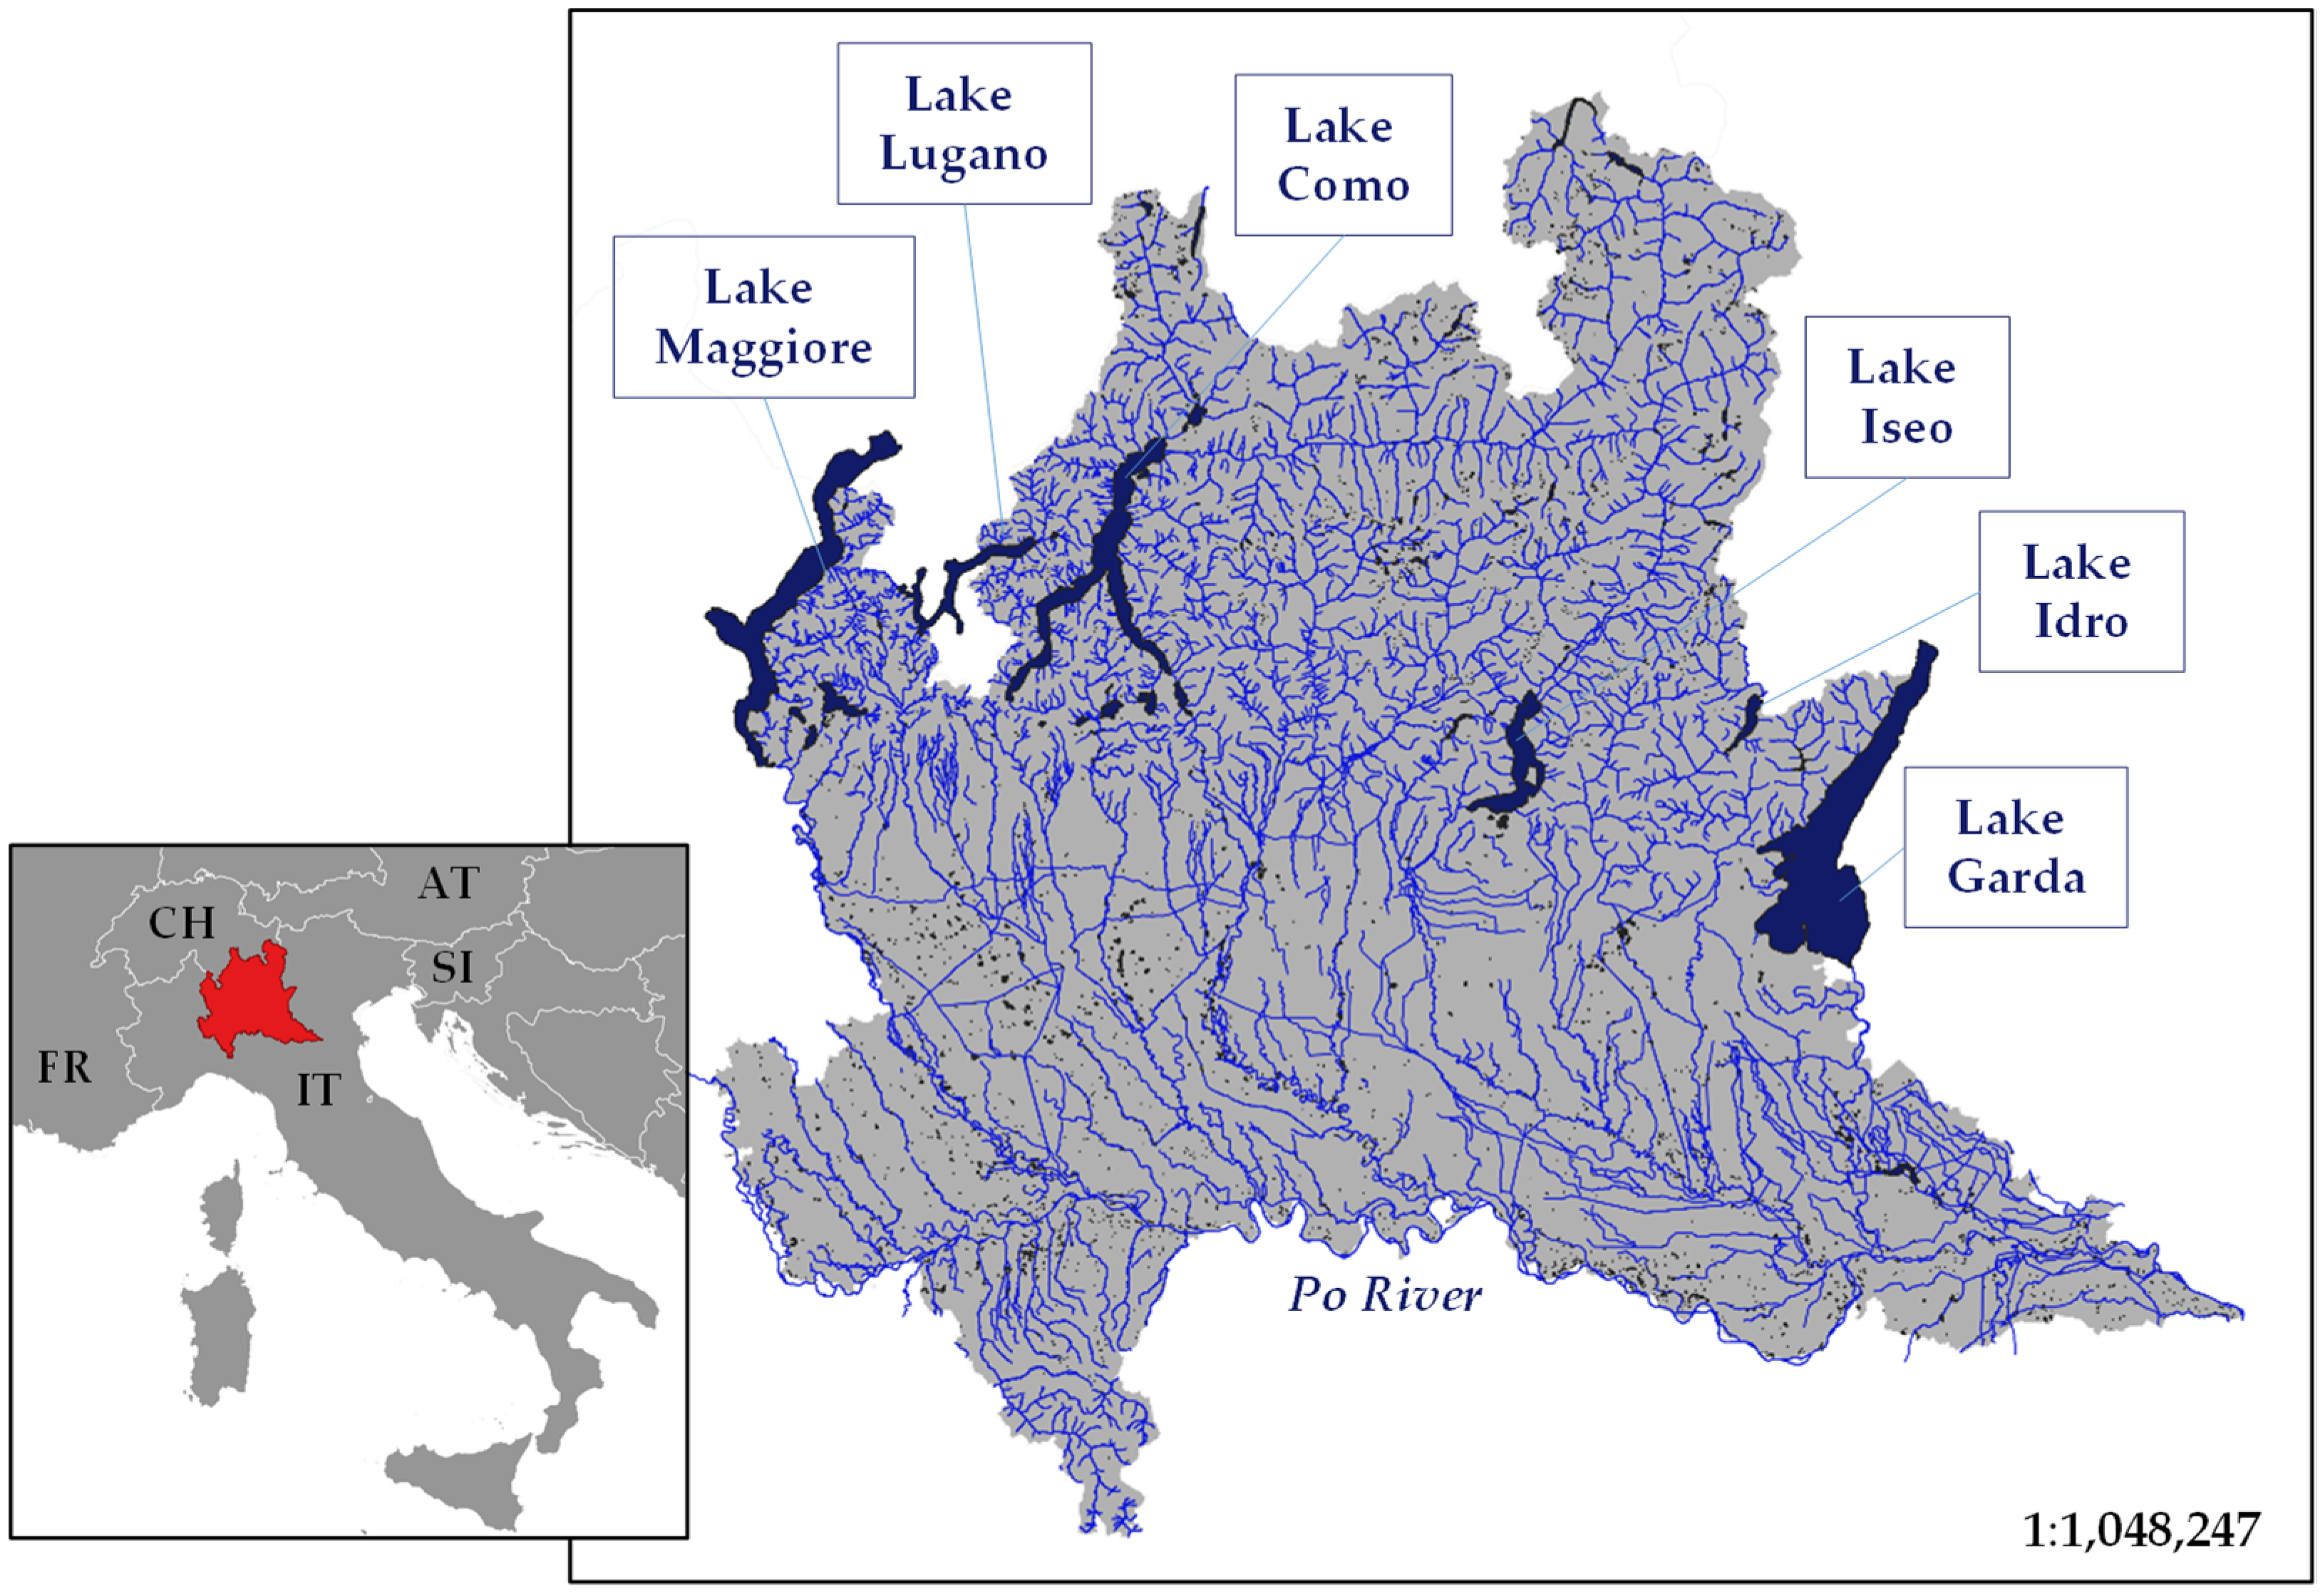 Environments | Free Full-Text | Monitoring and Management of Inland Waters:  Insights from the Most Inhabited Italian Region | HTML